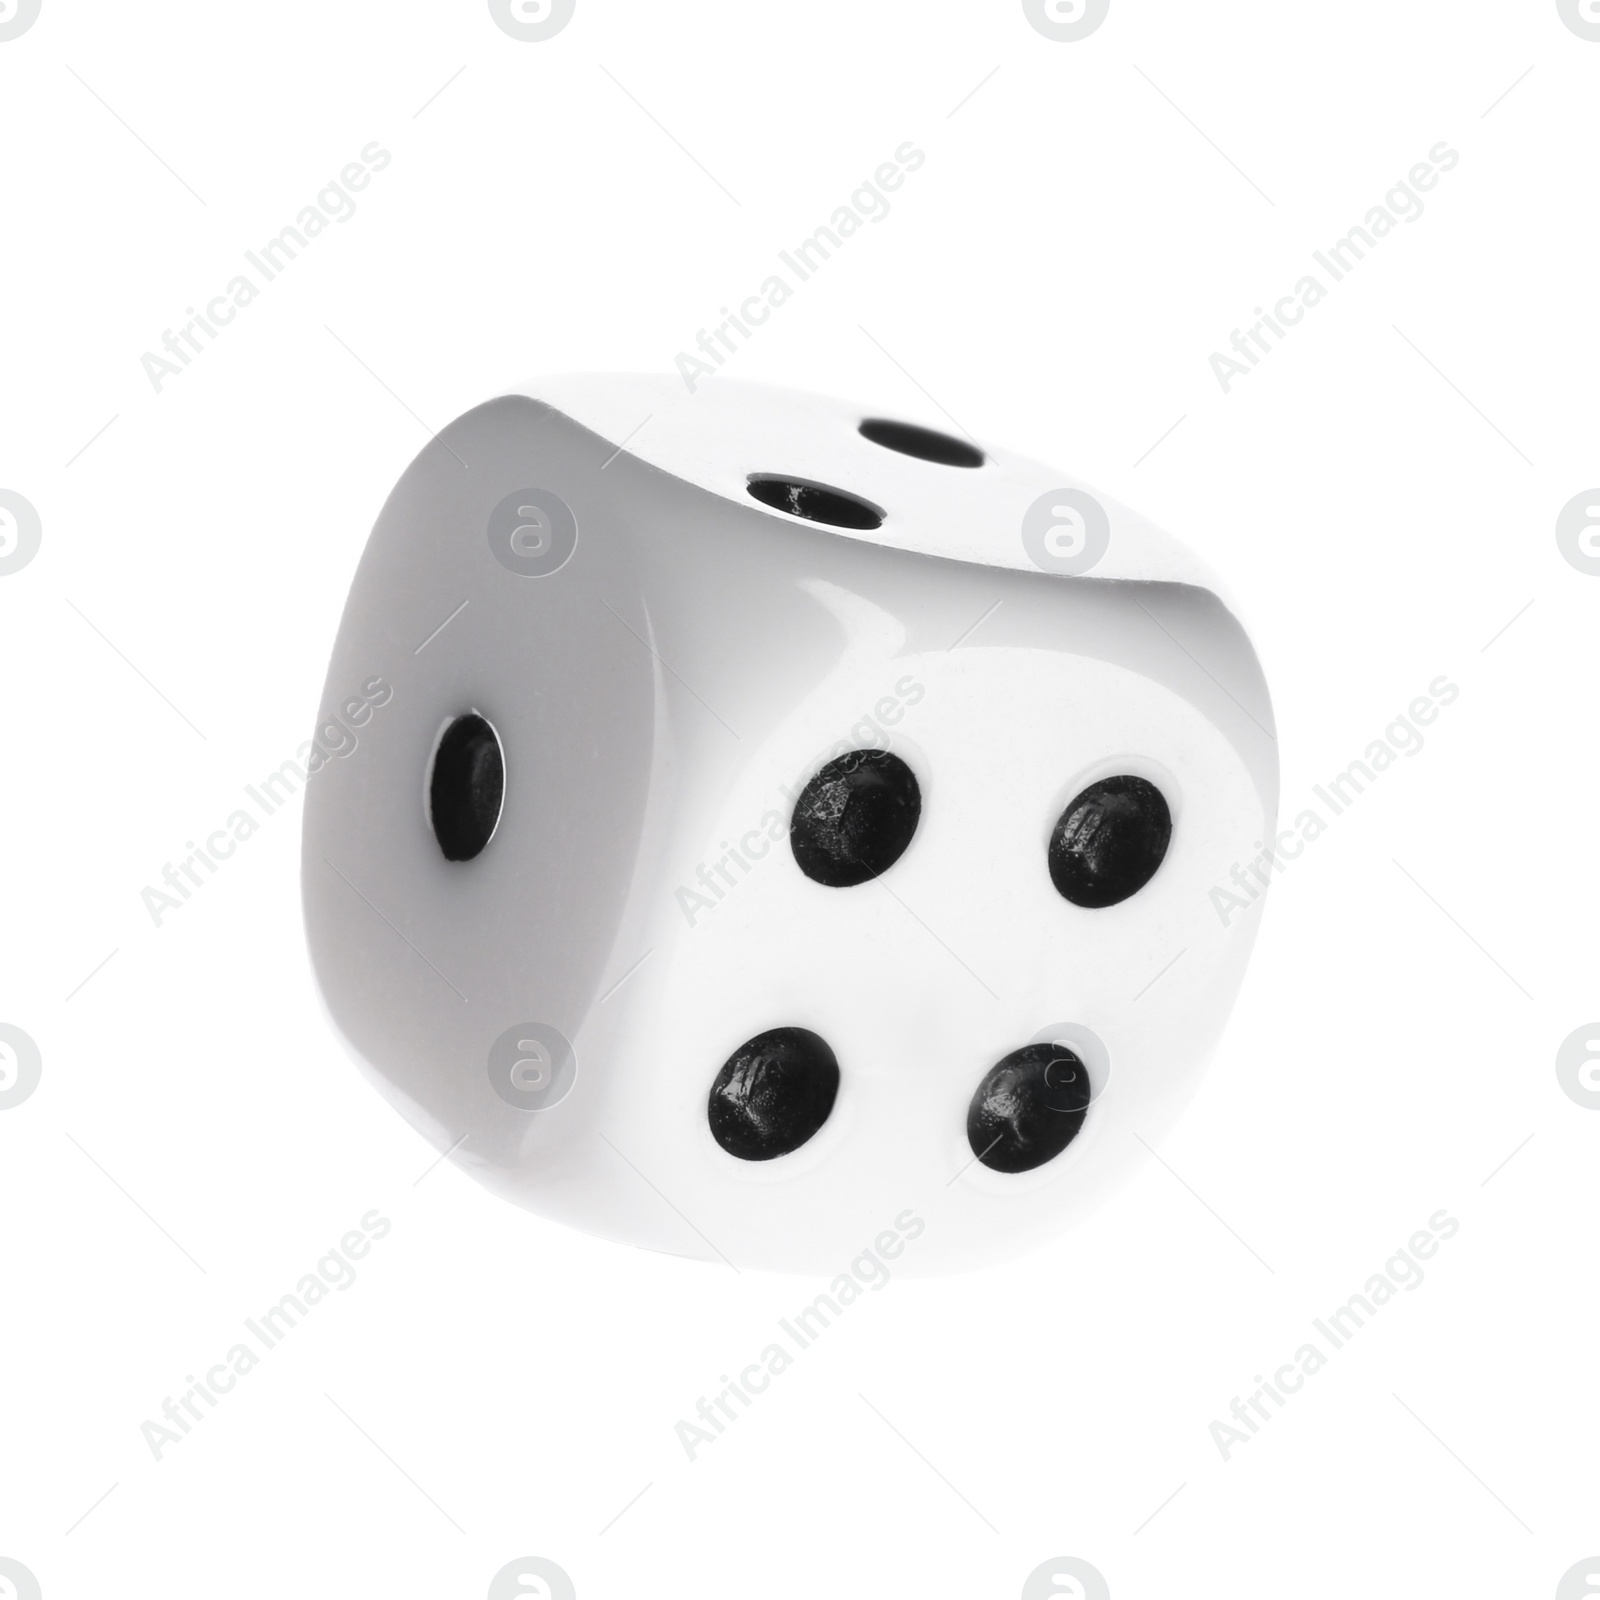 Photo of One plastic game dice isolated on white